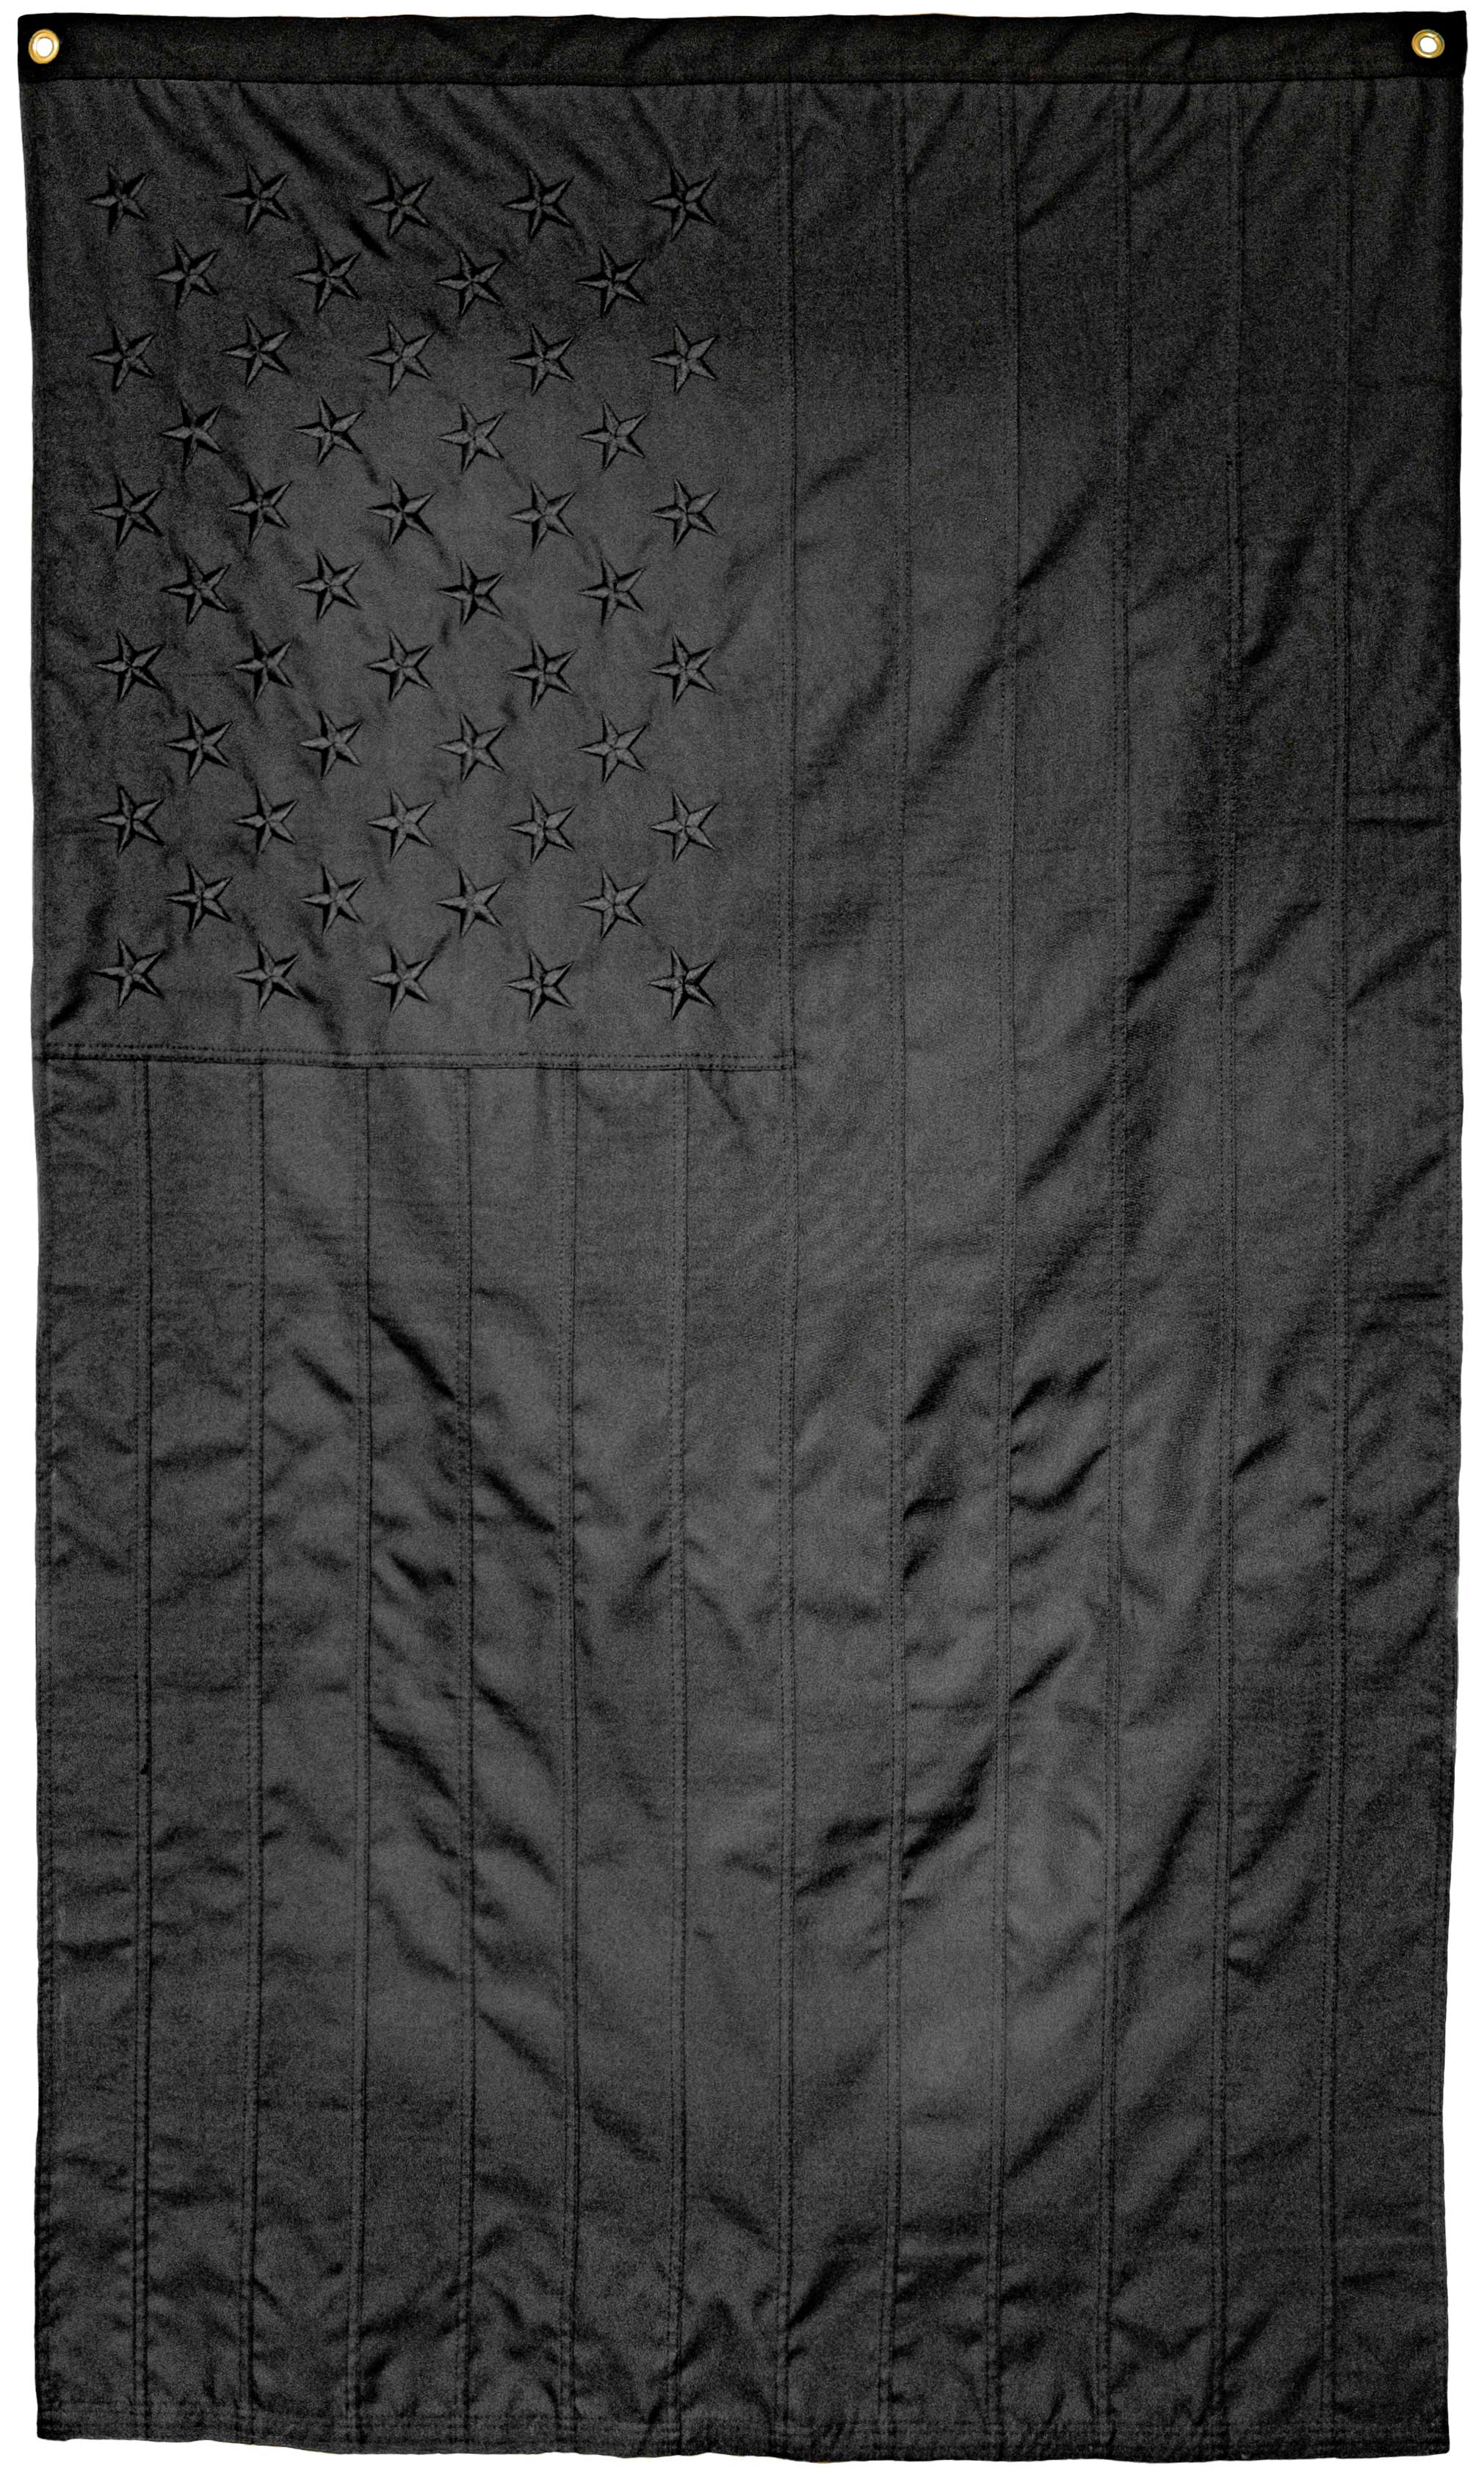 When To Fly The Black American Flag - About Flag Collections